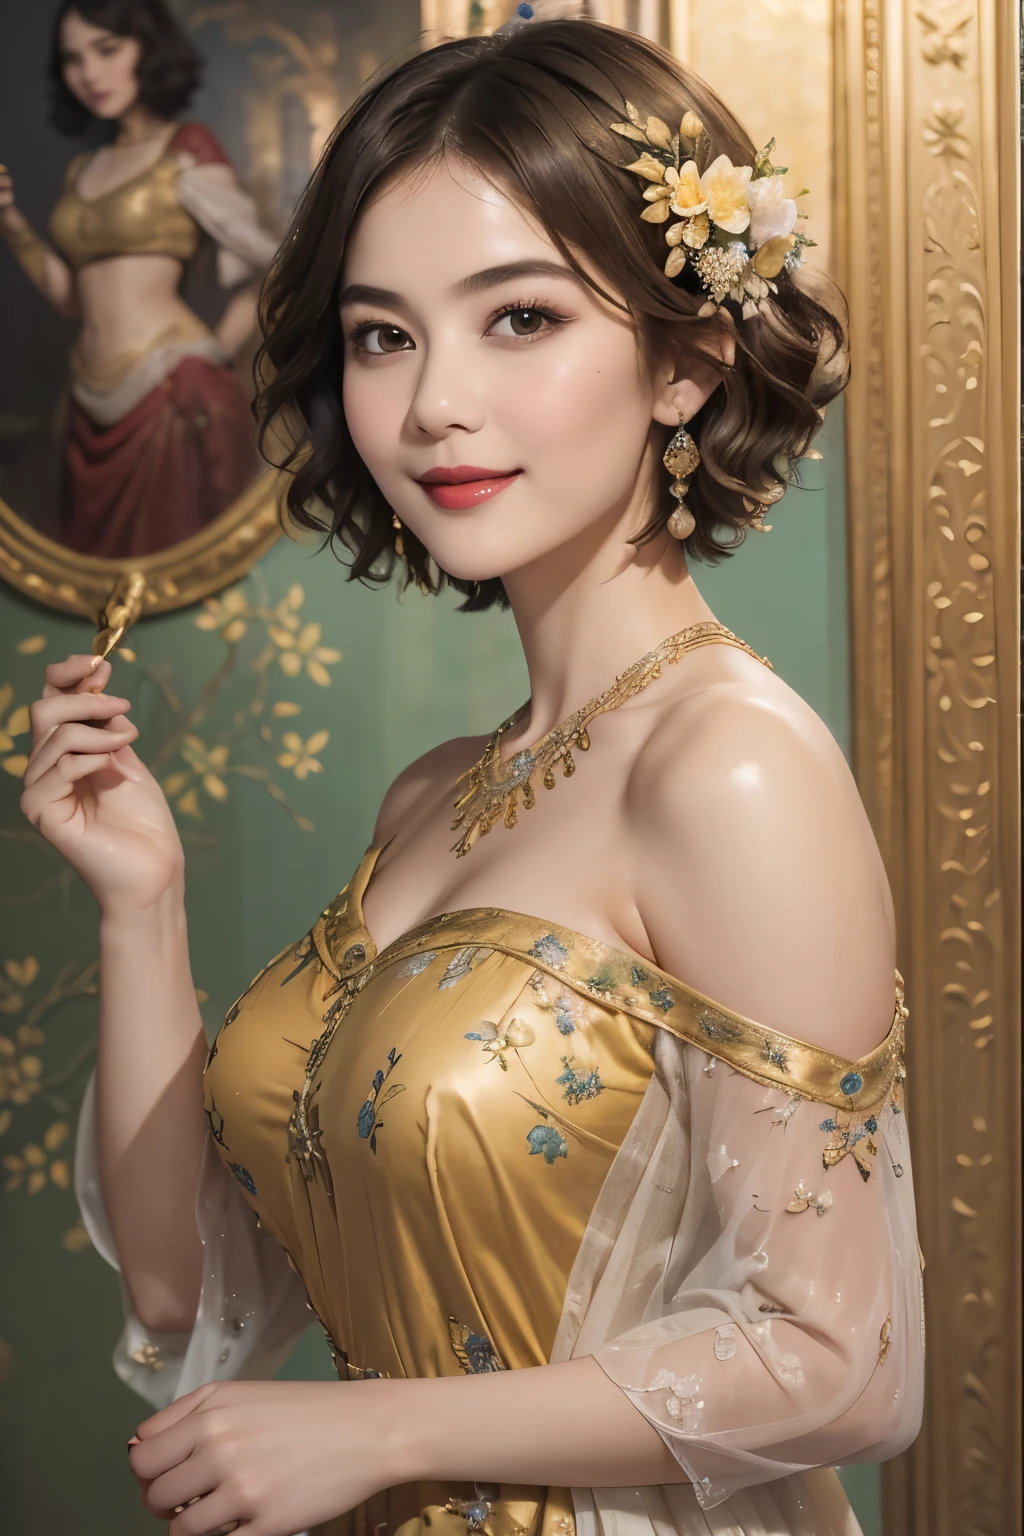 141
(a 20 yo woman,in the palace), (A hyper-realistic), (high-level image quality), ((beautiful hairstyle 46)), ((short-hair:1.46)), (kindly smile), (breasted:1.1), (lipsticks), (is wearing dress), (murky,wide,Luxurious room), (florals), (an oil painting、Rembrandt)